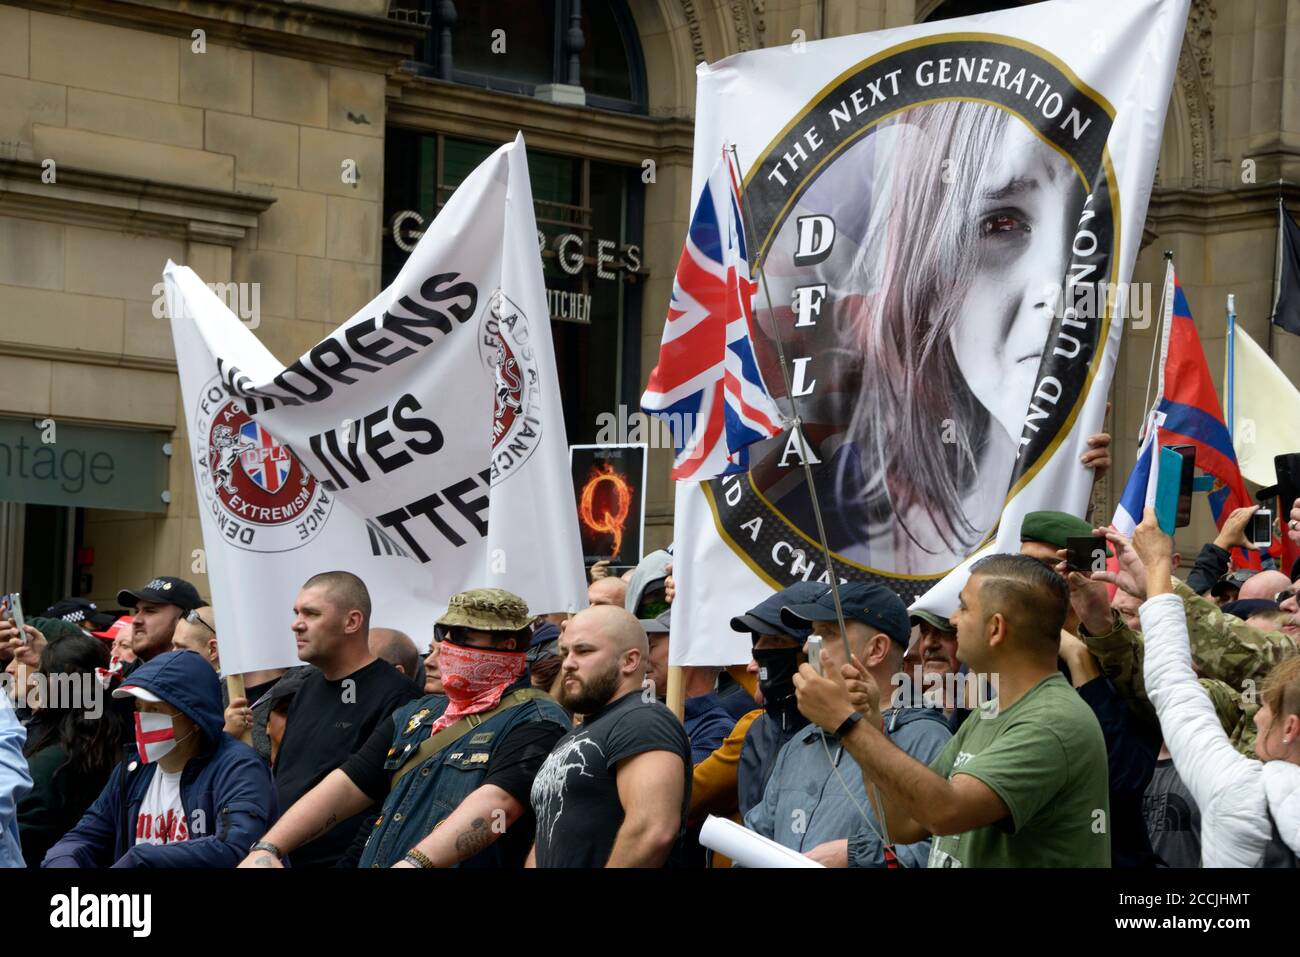 Right wing anti-pedophile protesters with banners, in Nottingham. Stock Photo